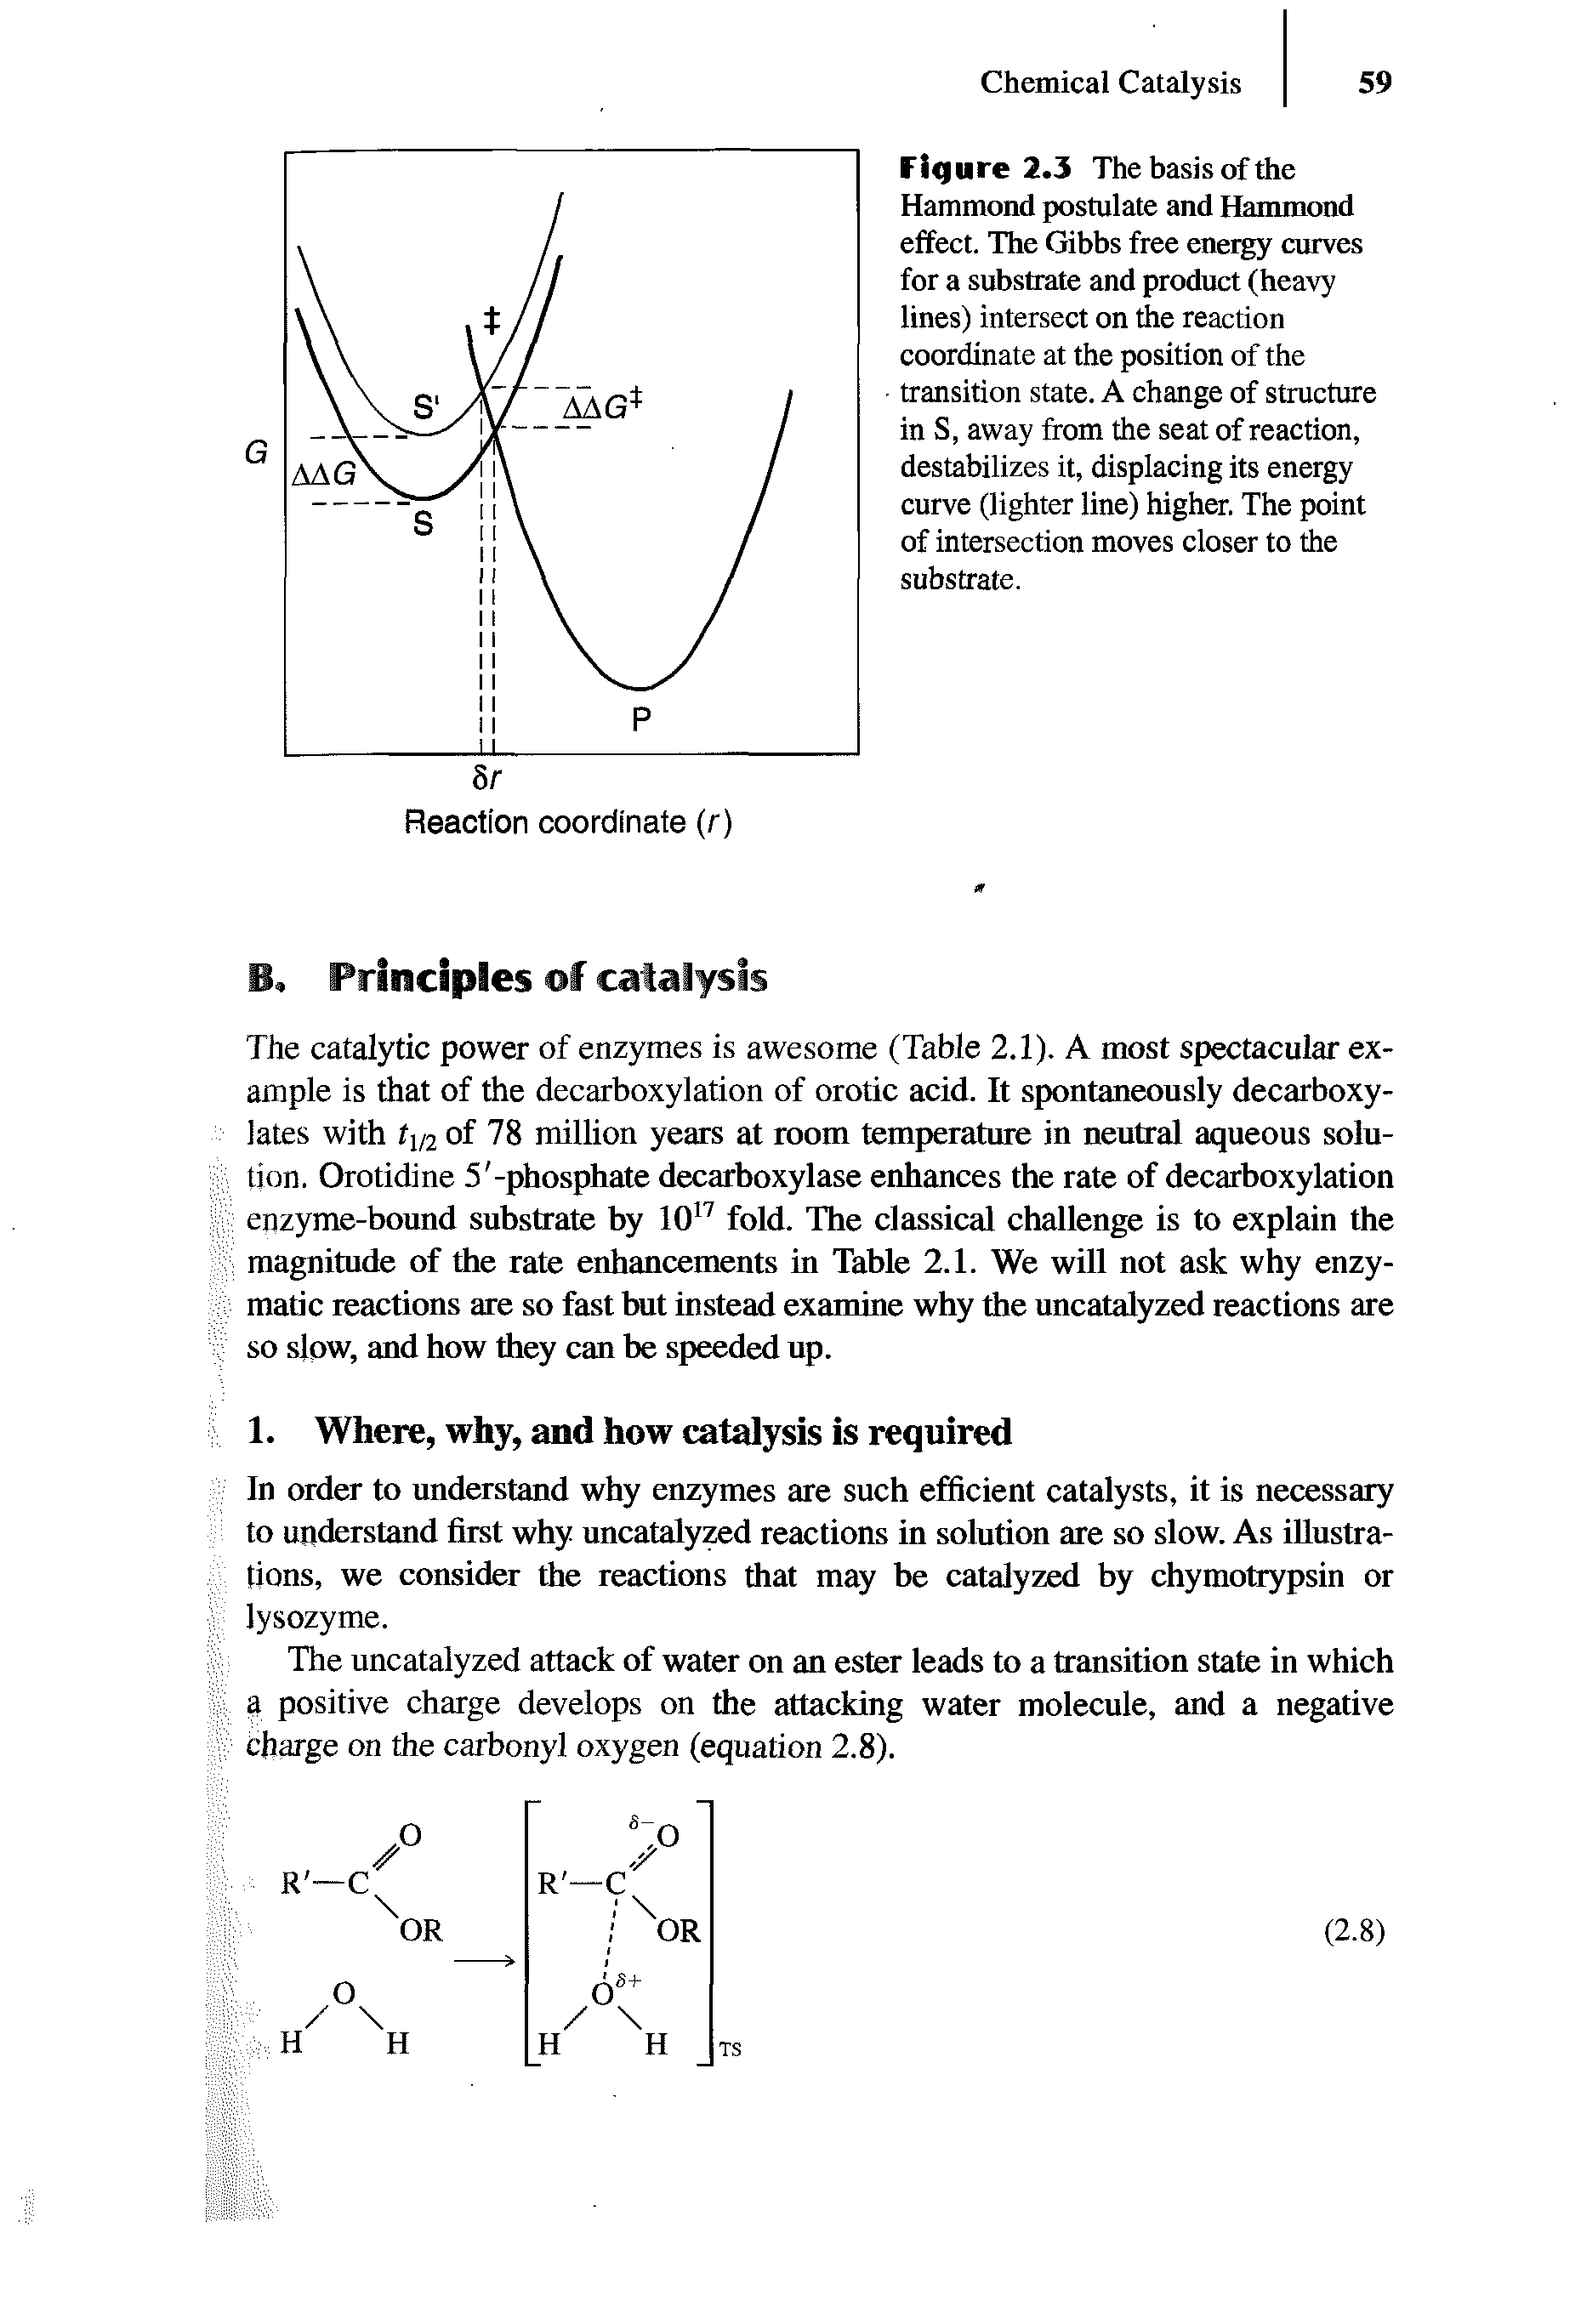 Figure 2.3 The basis of the Hammond postulate and Hammond effect. The Gibbs free energy curves for a substrate and product (heavy lines) intersect on the reaction coordinate at the position of the transition state. A change of structure in S, away from the seat of reaction, destabilizes it, displacing its energy curve (lighter line) higher. The point of intersection moves closer to the substrate.